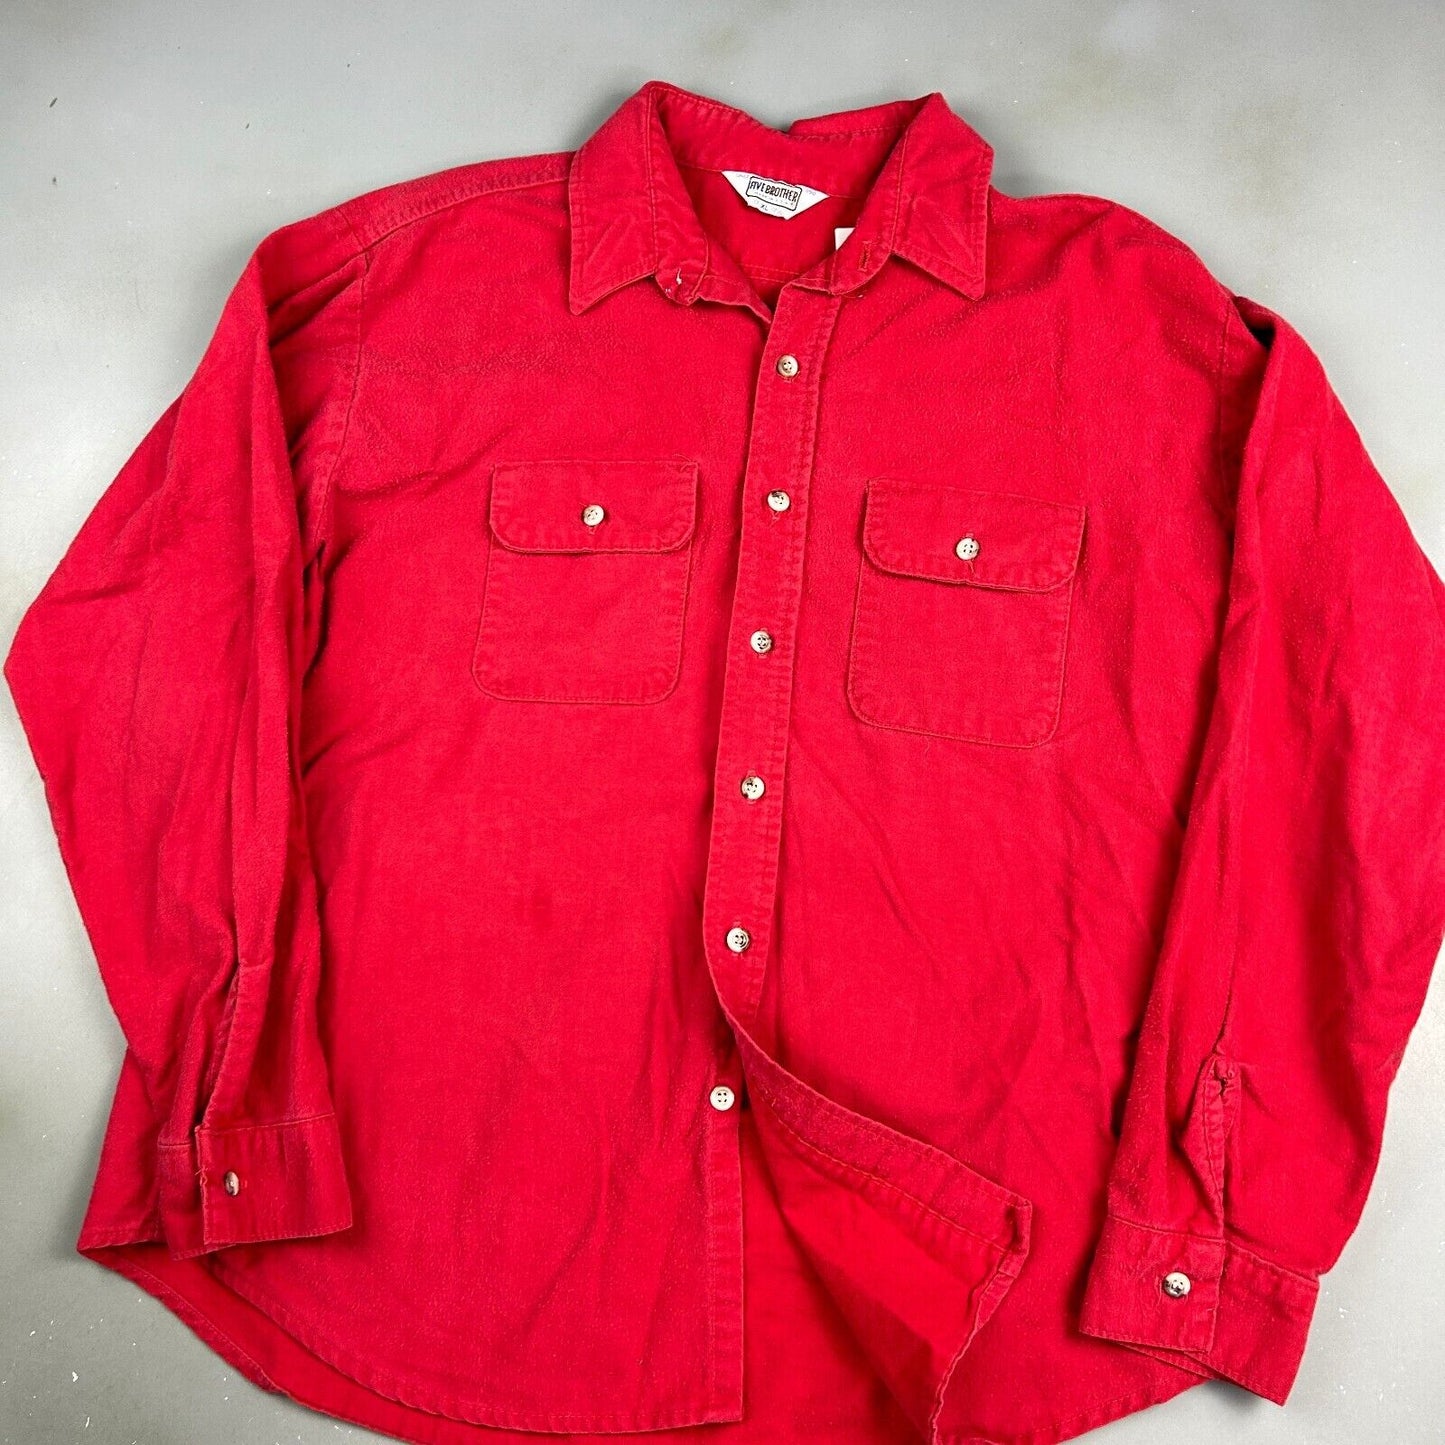 VINTAGE 90s Five Brother Red Chamois Cloth Button Up Shirt sz XL Adult